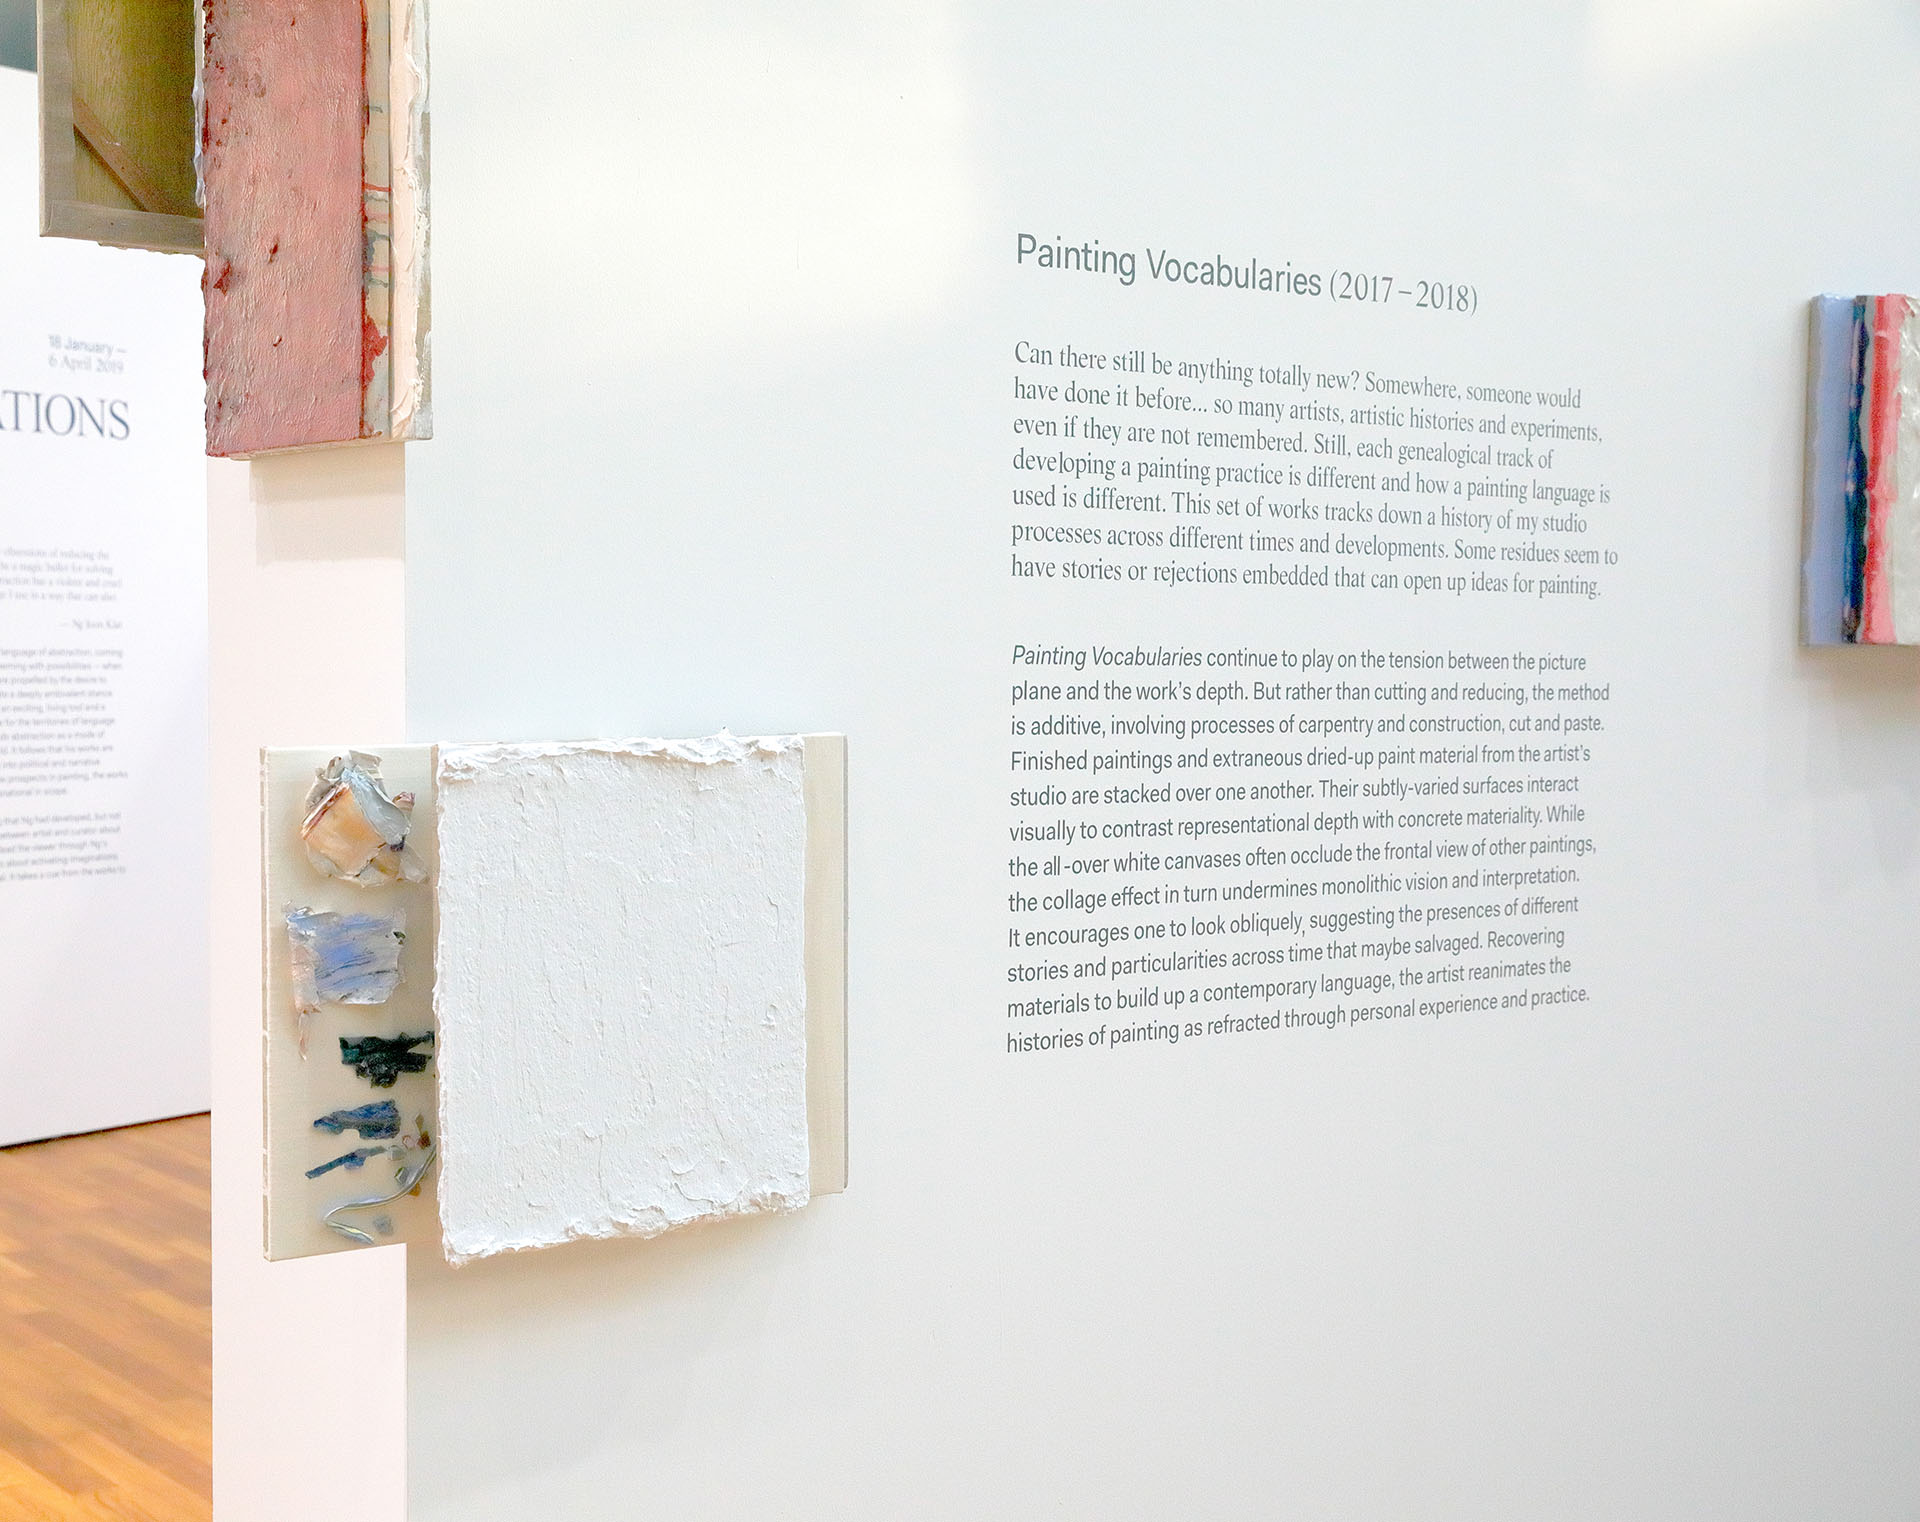 photo of exhibtion: Searching Operation. Painting Vocabularies photo 2